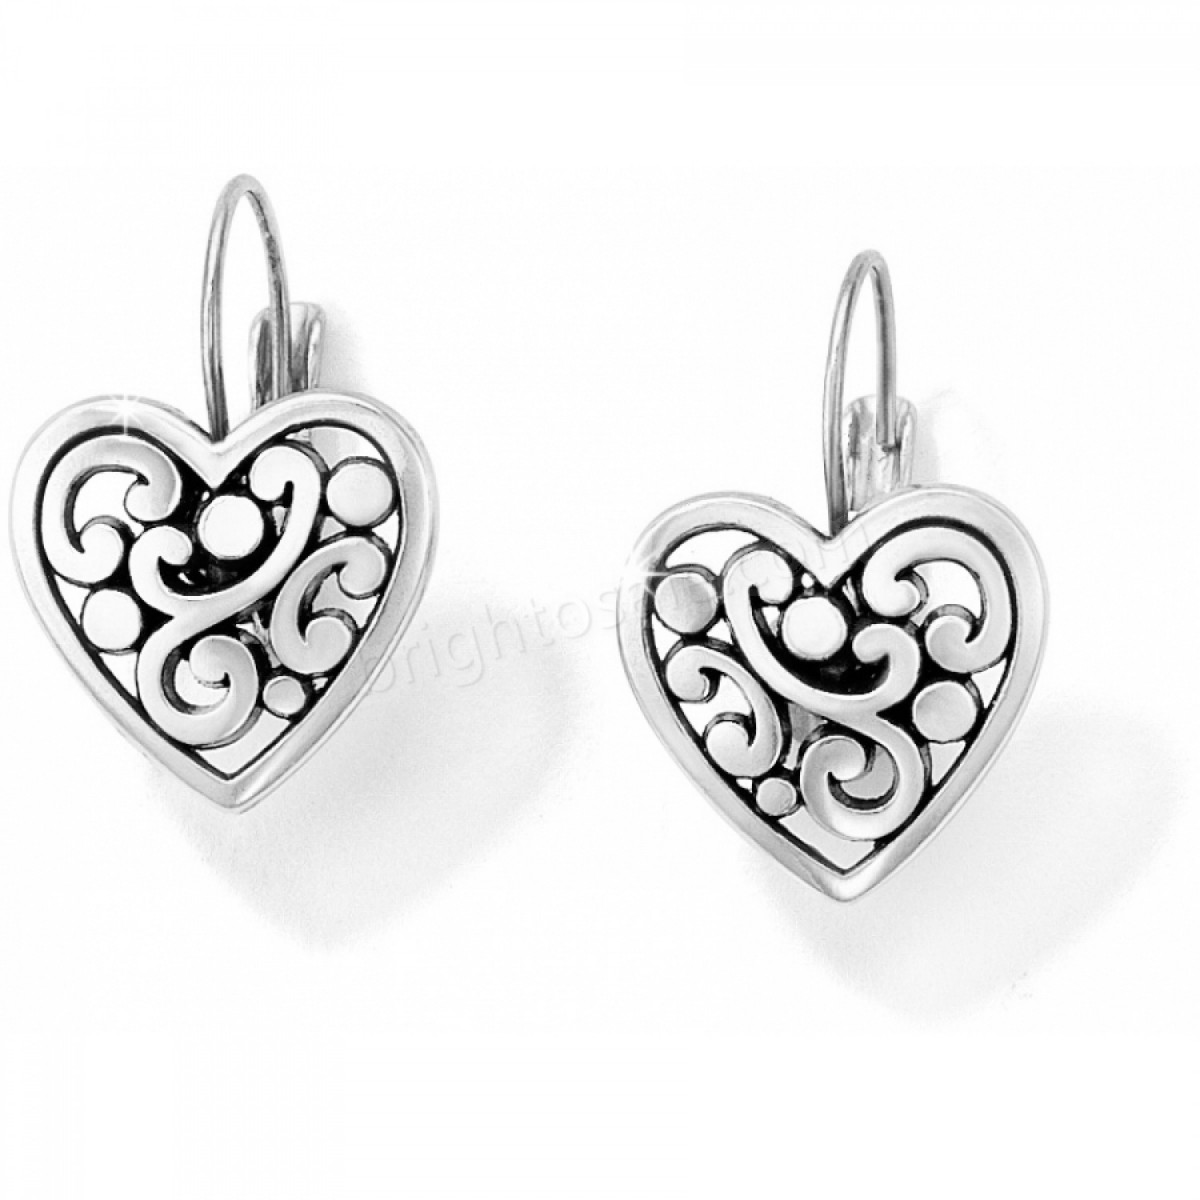 Brighton Collectibles & Online Discount Contempo Heart Leverback Earrings - -0